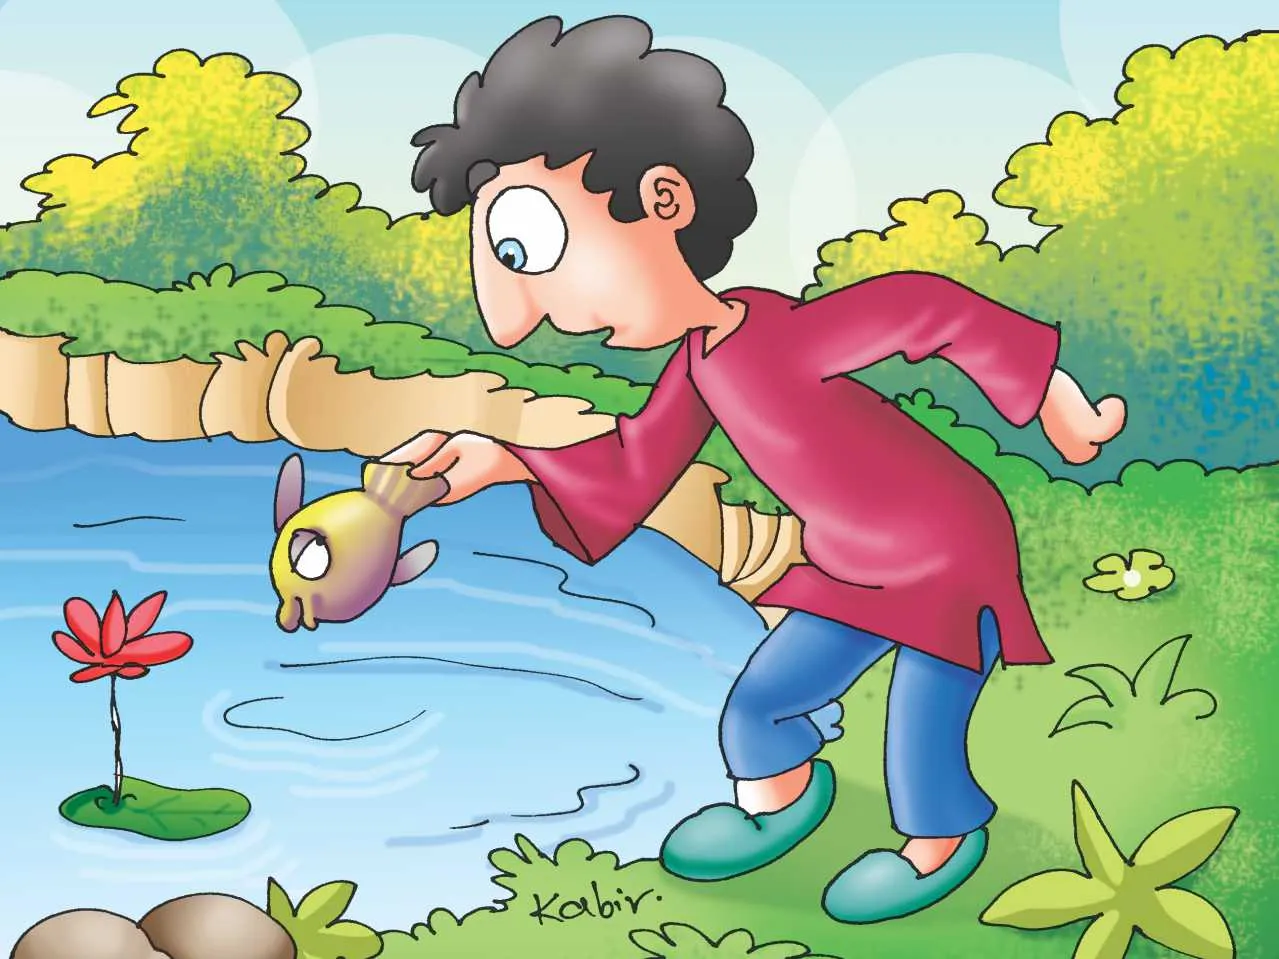 Boy with Fish in hand cartoon image